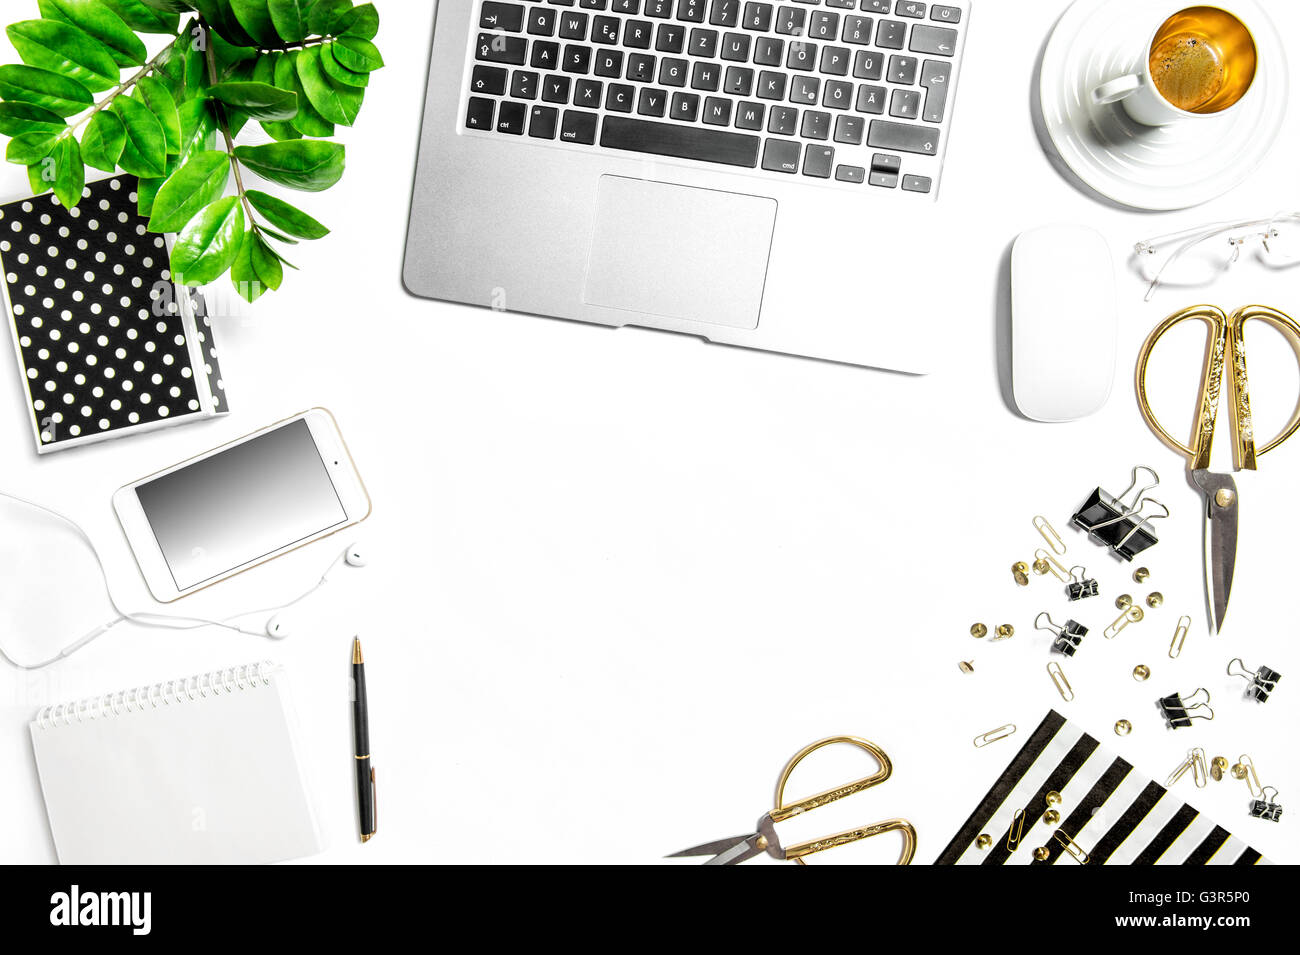 Workplace with notebook, digital phone, office supplies, diary, coffee, green plant. Creative working desk. Hero header Stock Photo